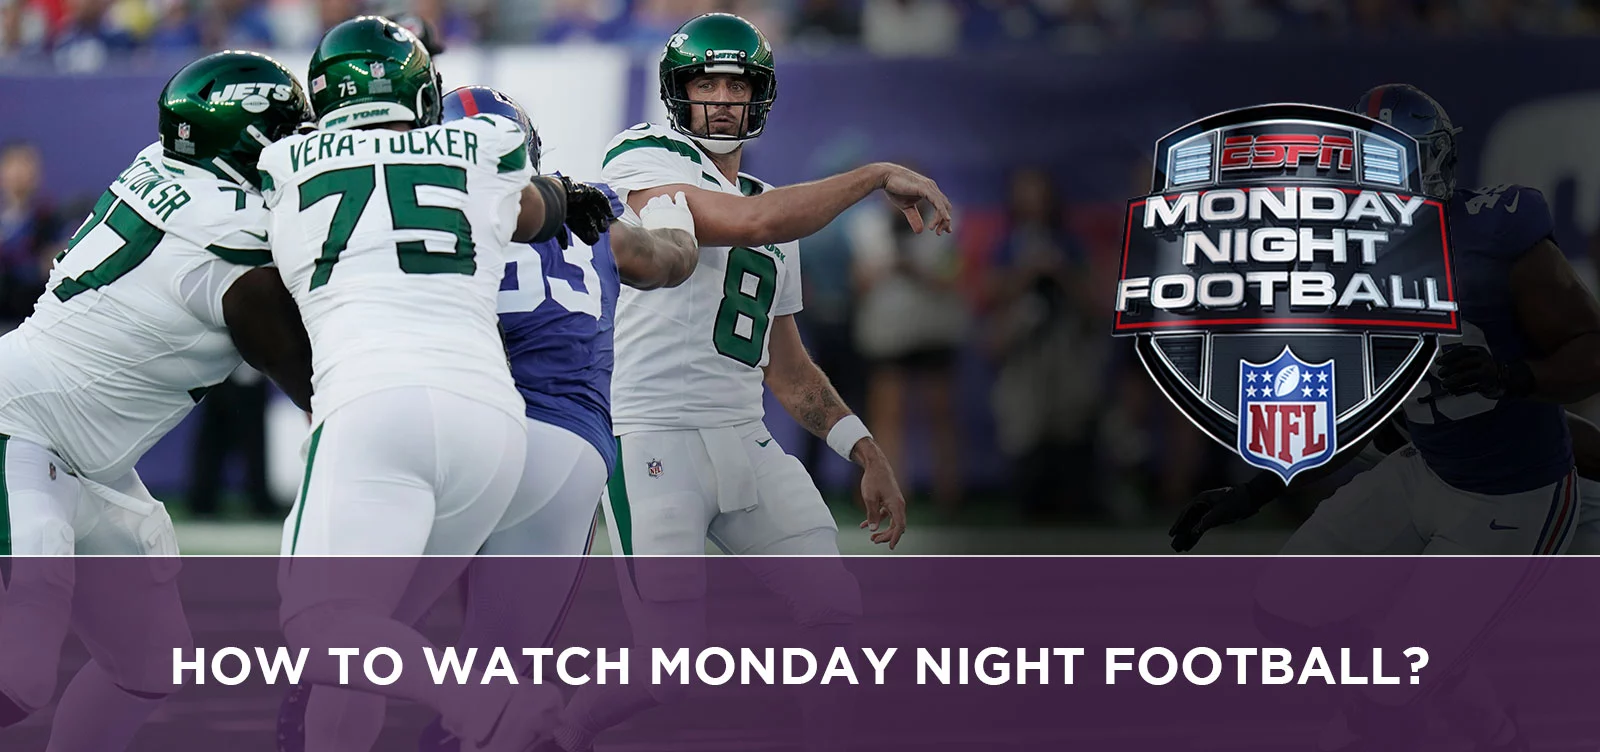 How To Watch Monday Night Football?